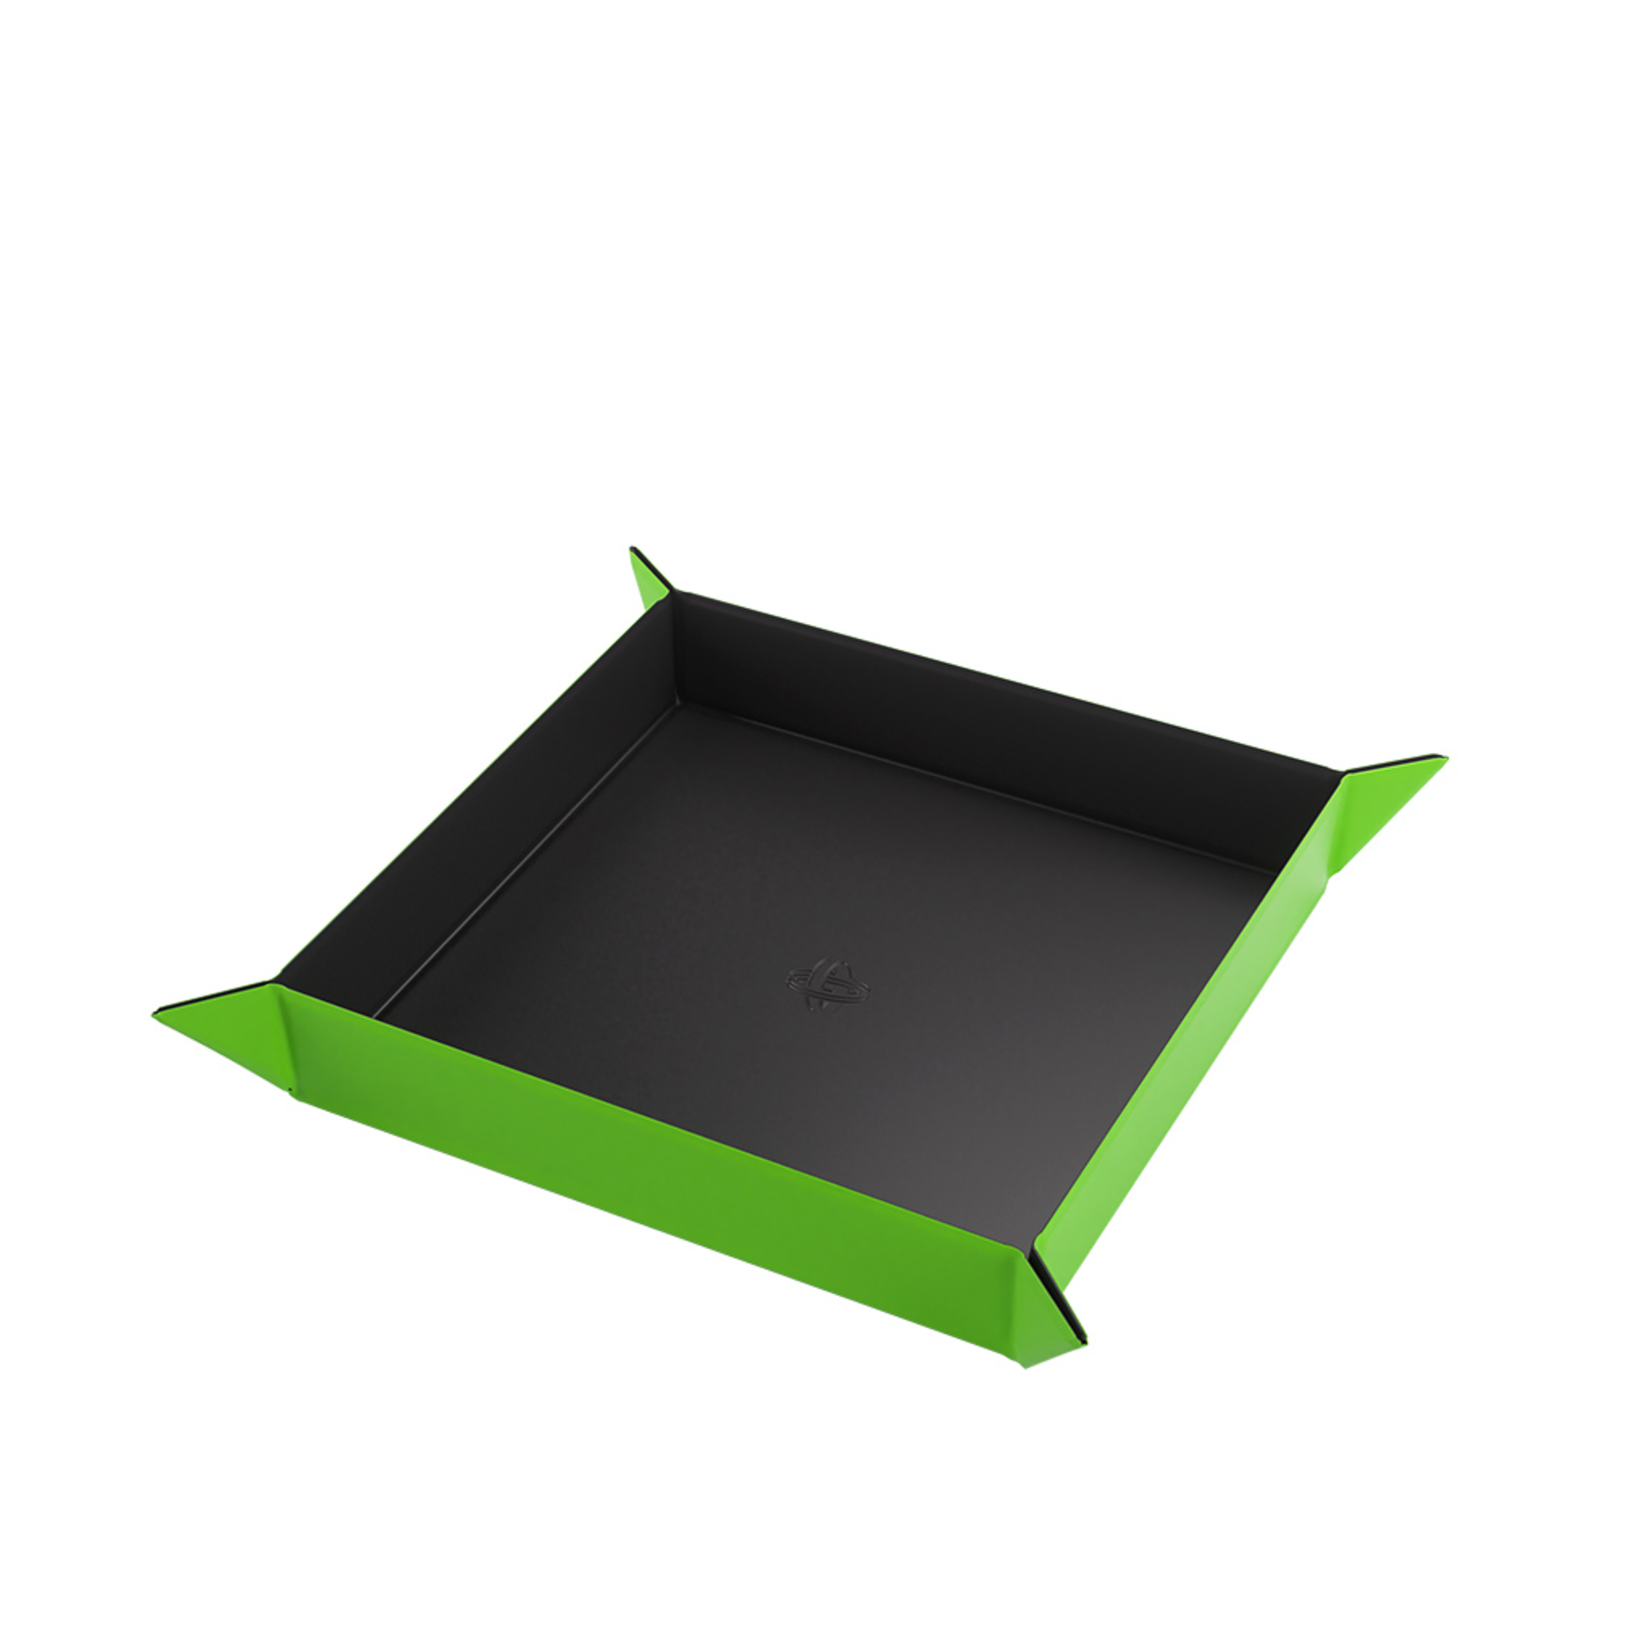 Gamegenic Gamegenic Magnetic Dice Tray Square Black and Green